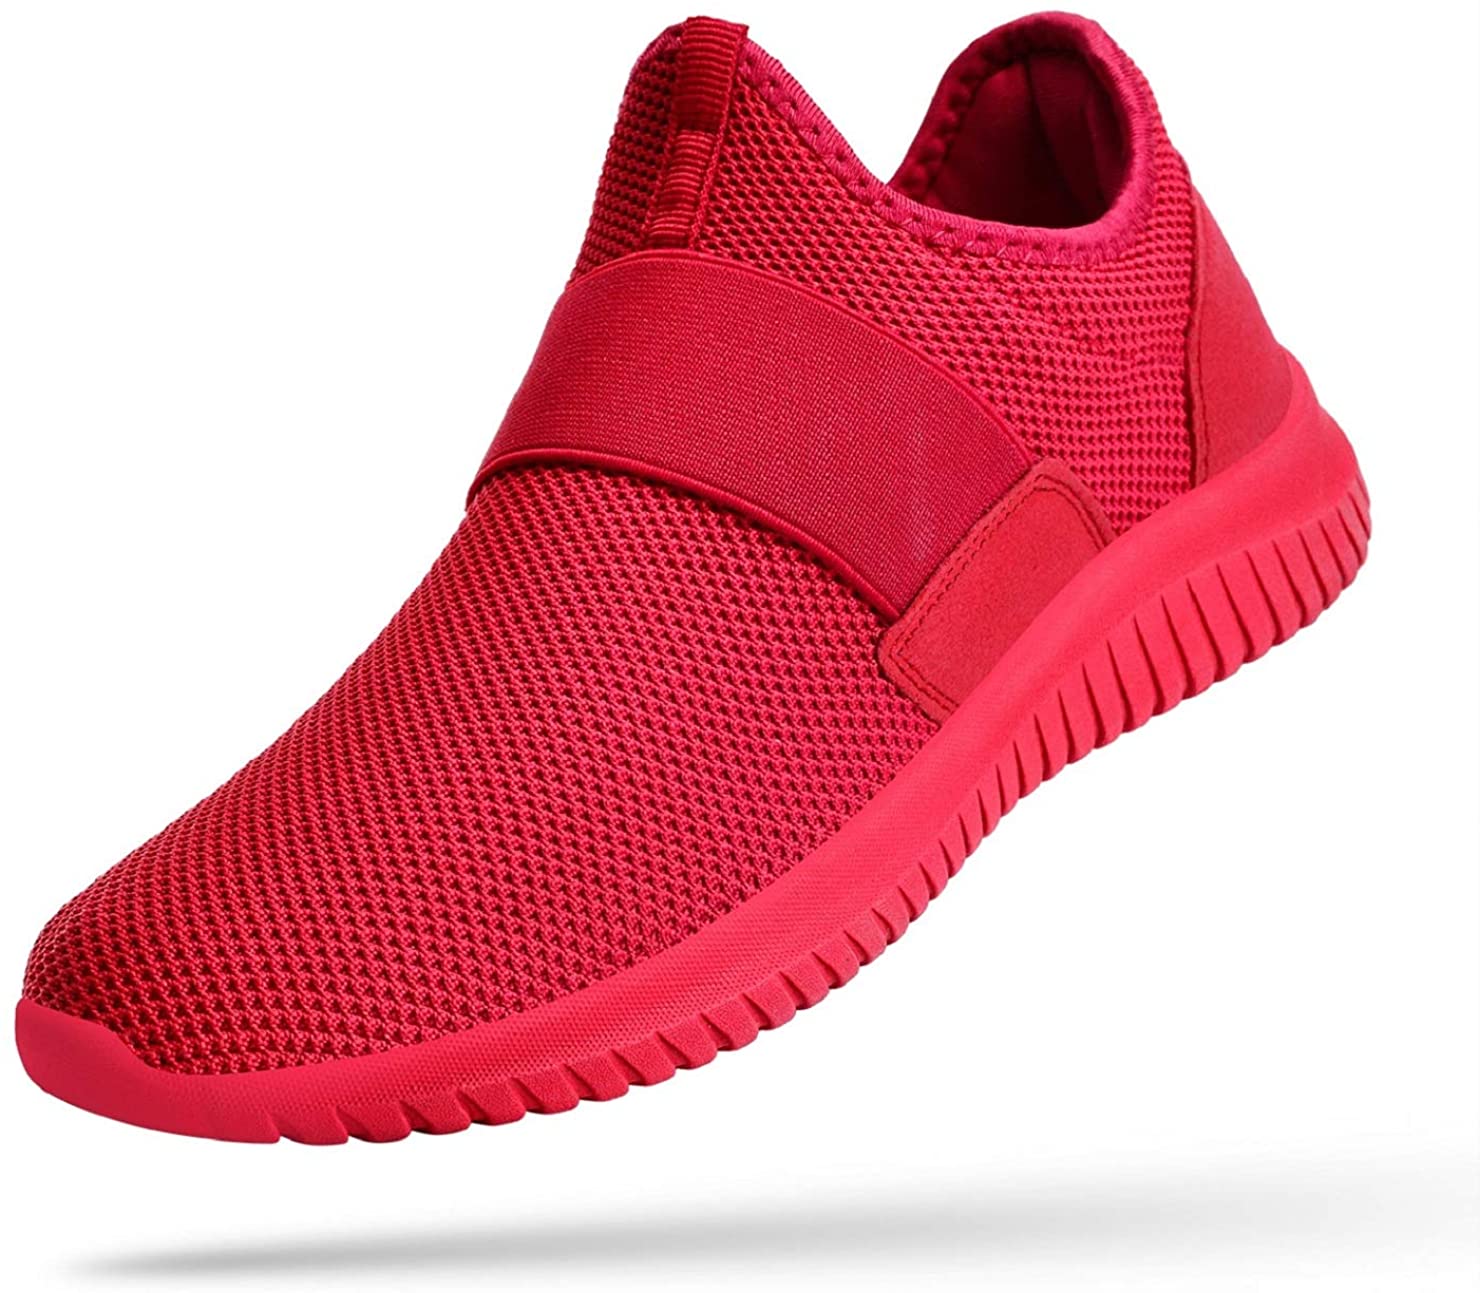 Troadlop Mens Sneakers Slip on Mens Laceless Tennis Shoes Knitted Breathable Run 